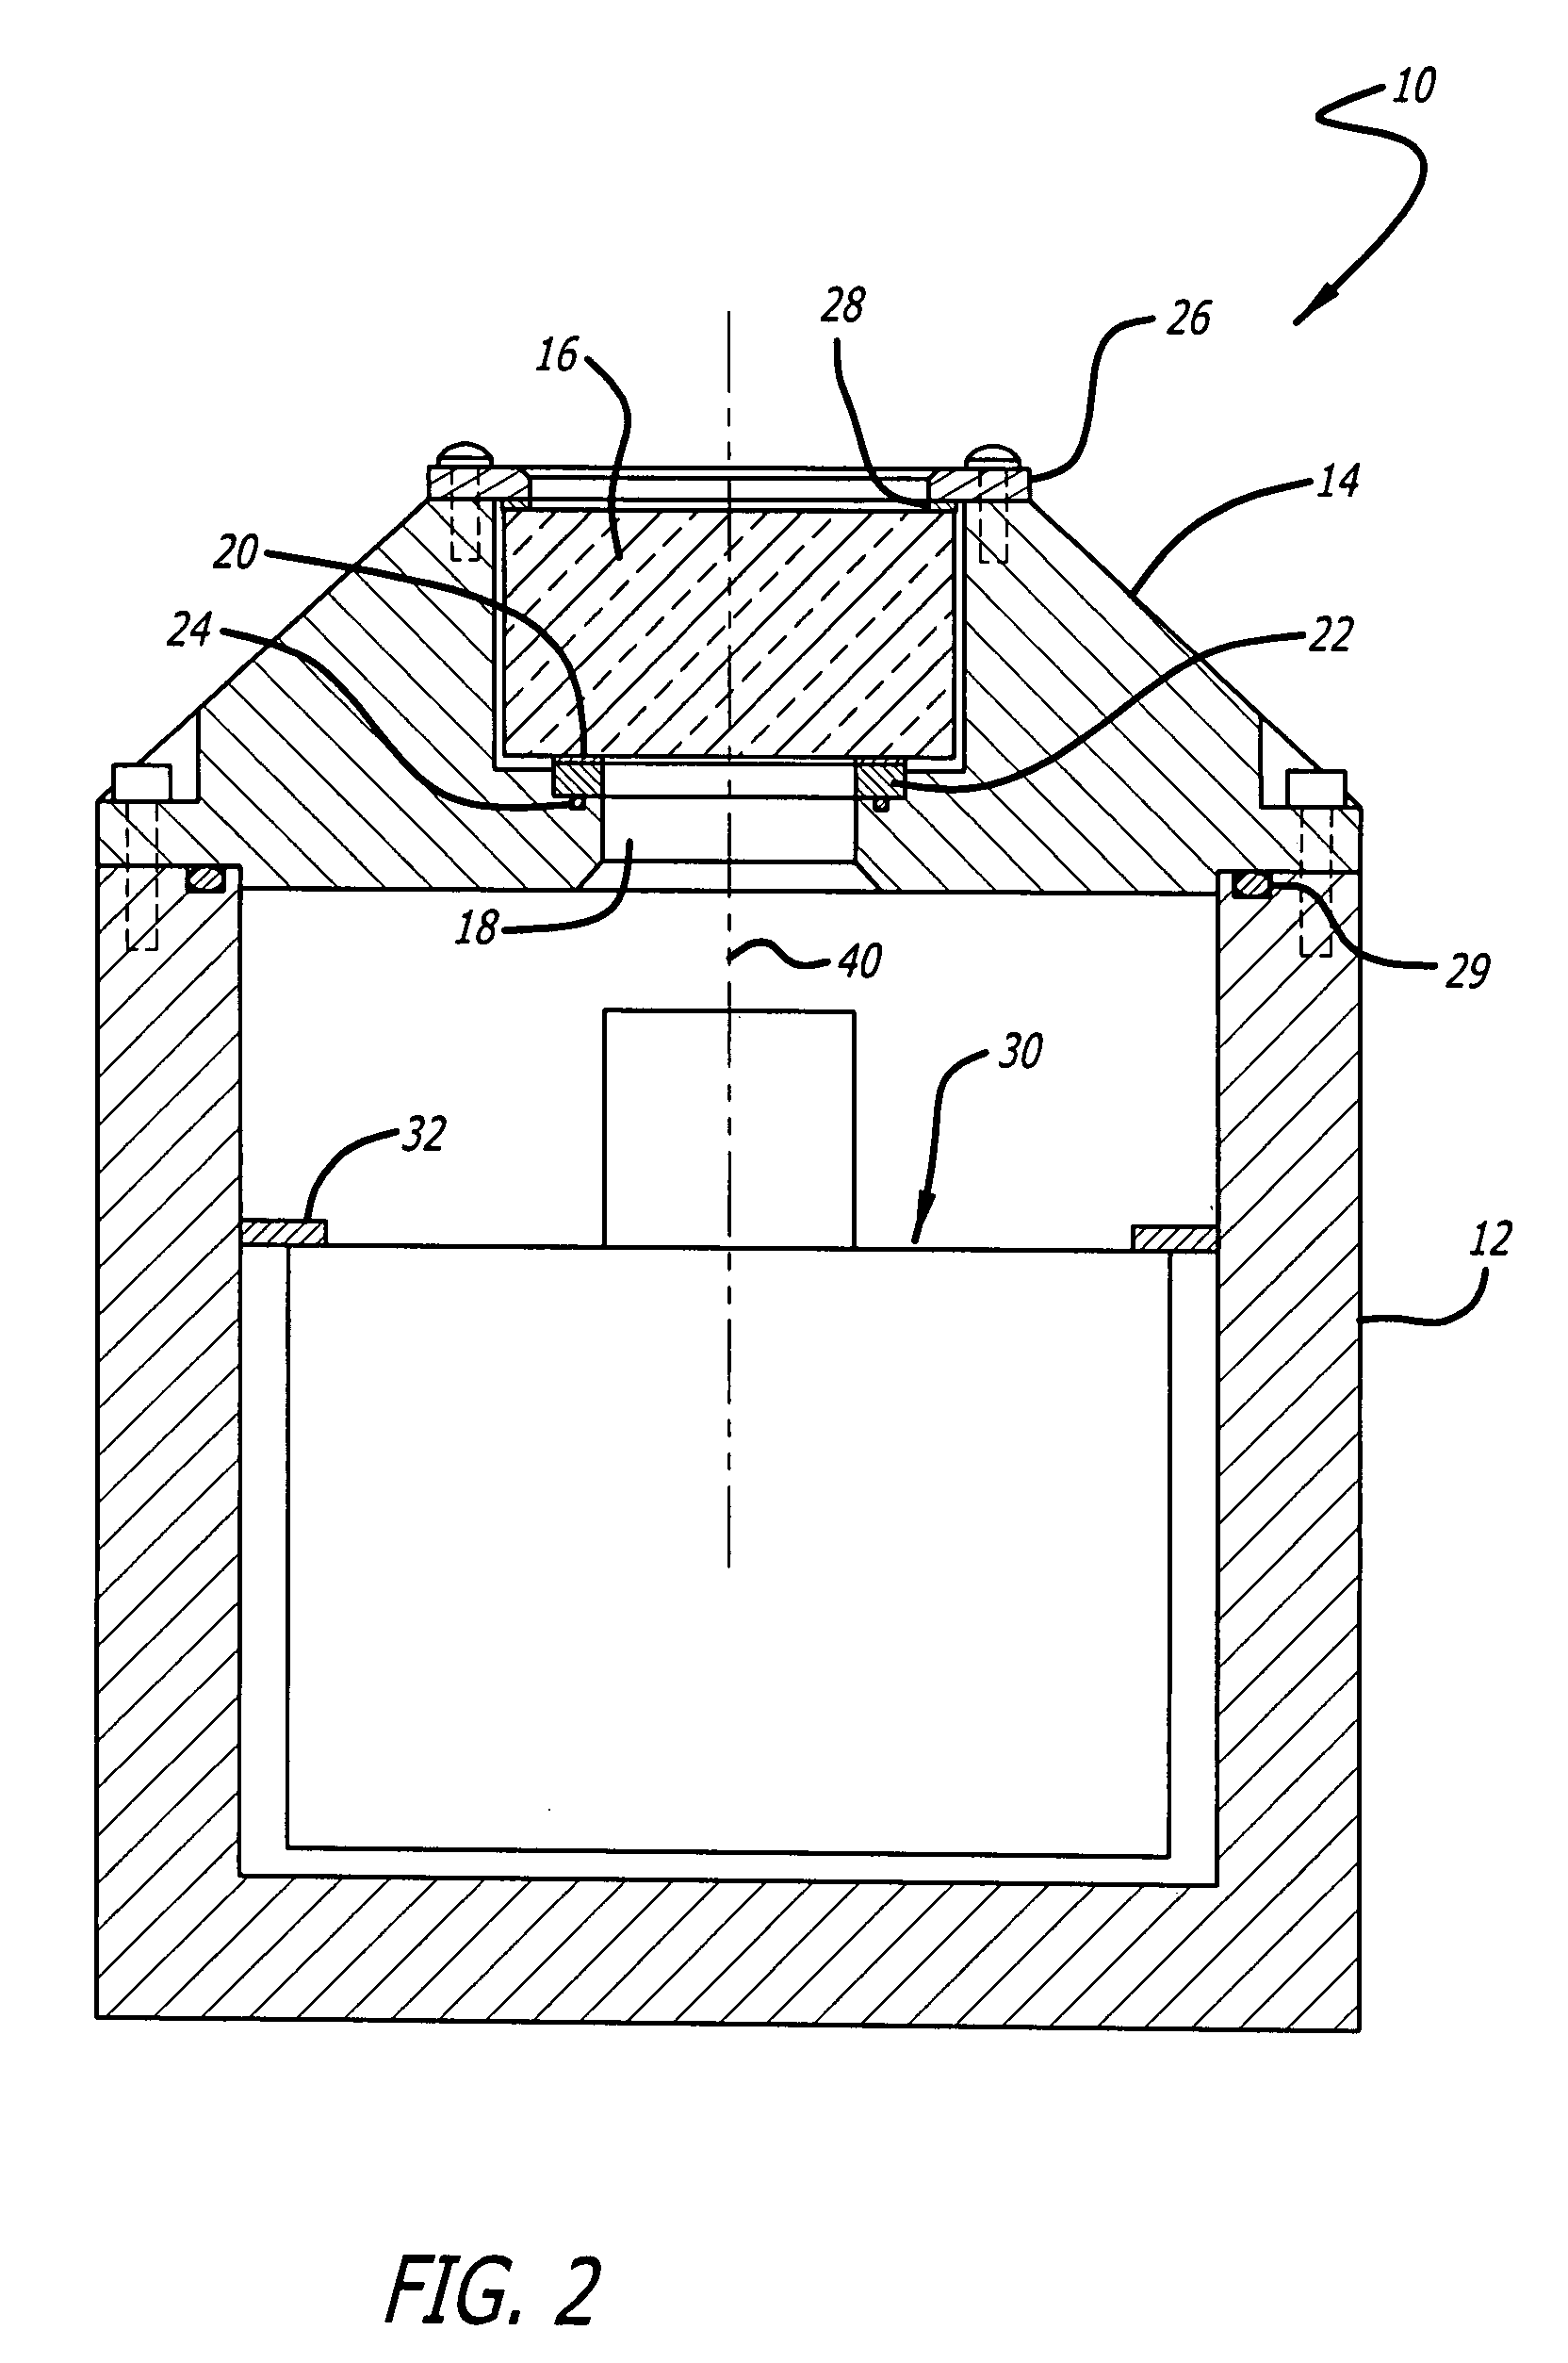 Housing with glass window for optical instruments in high pressure underwater environments